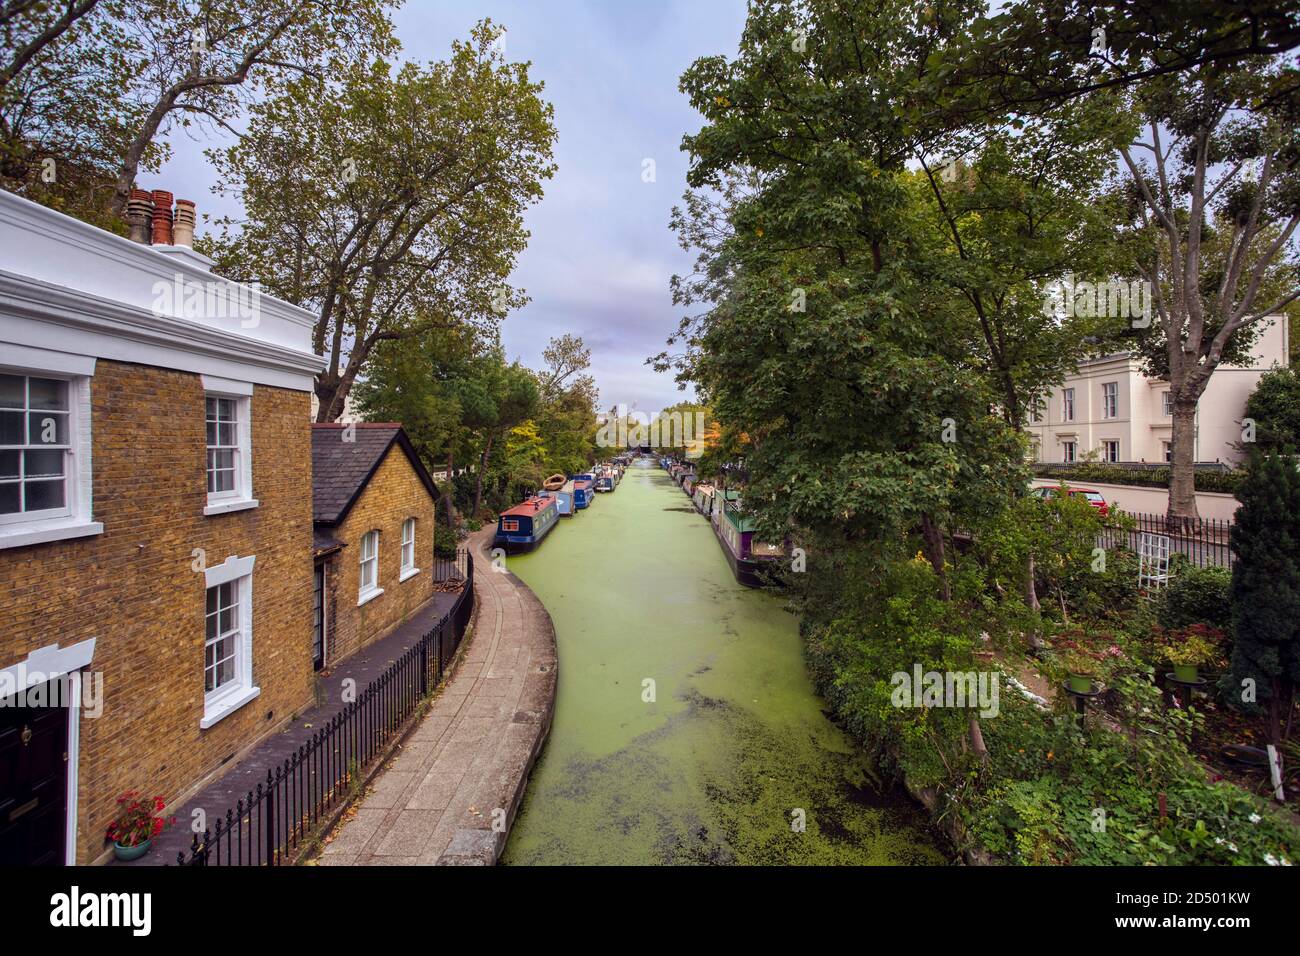 Autumn Image of Little Venice Canal in Maida Vale, North West London Stock Photo